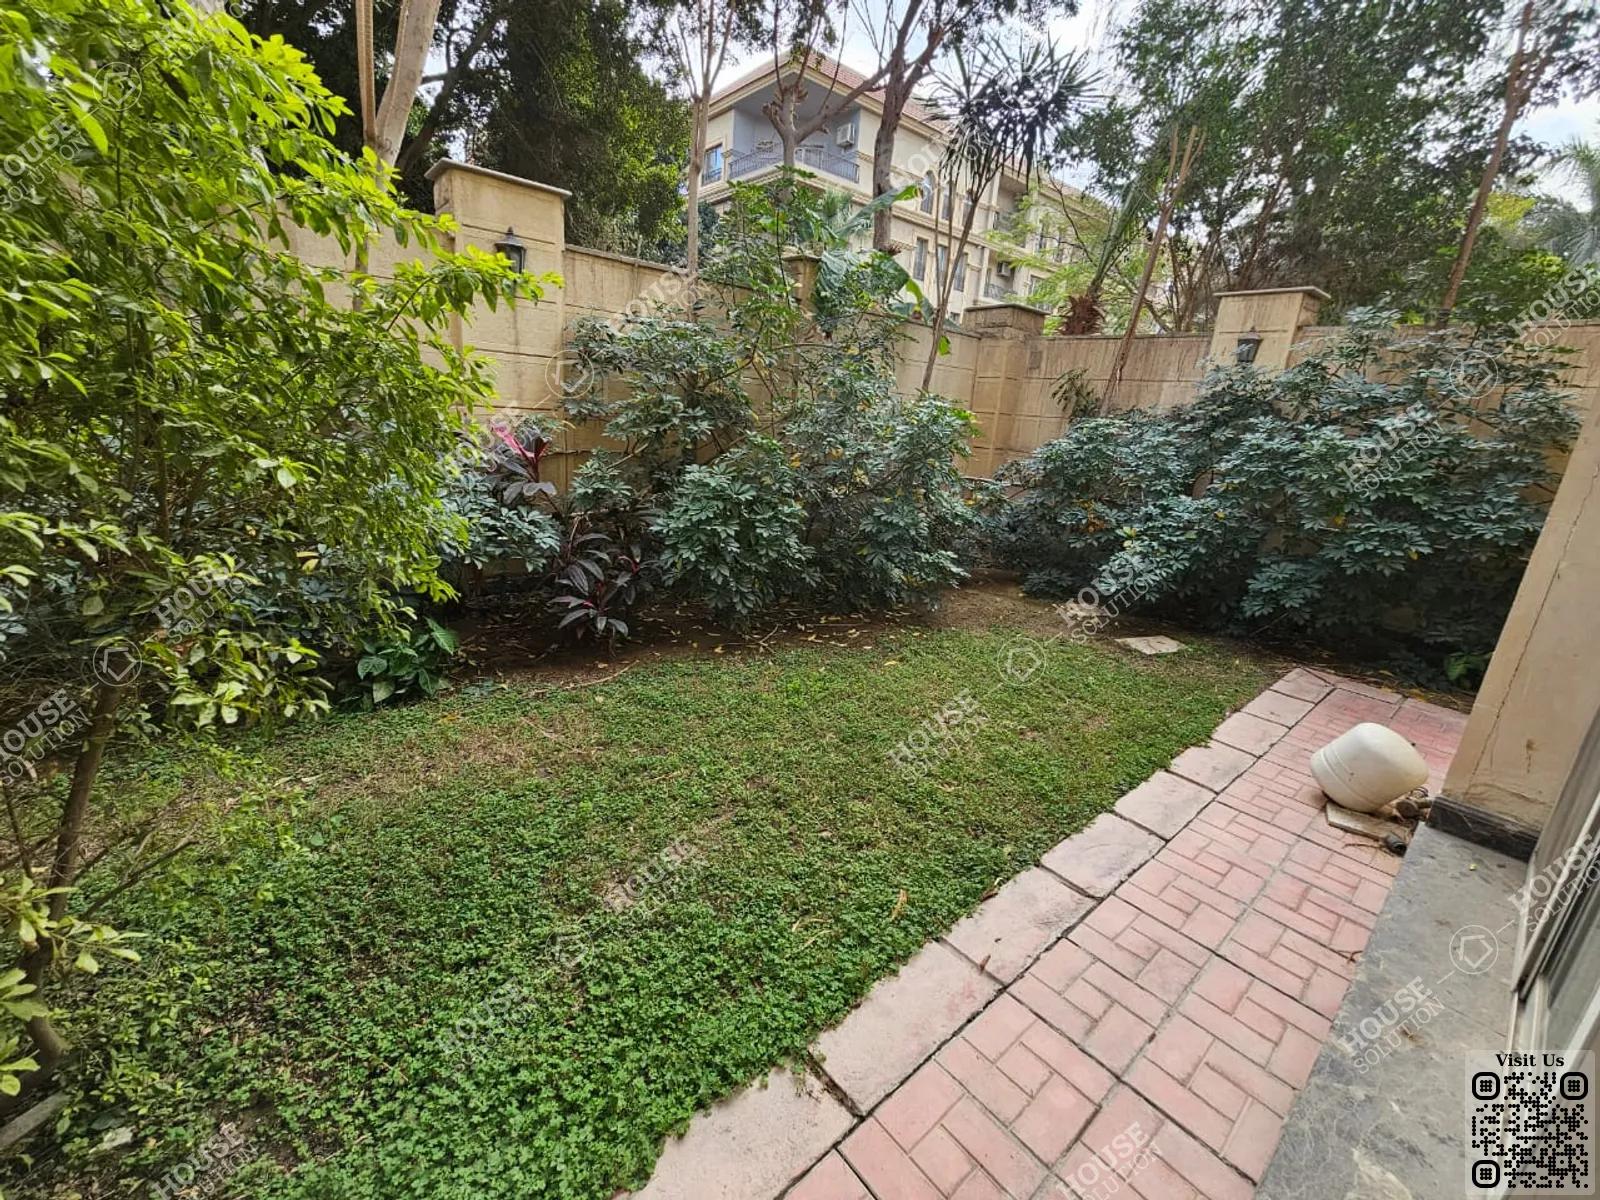 PRIVATE GARDEN  @ Ground Floors For Rent In Maadi Maadi Sarayat Area: 250 m² consists of 2 Bedrooms 3 Bathrooms Modern furnished 5 stars #5804-2